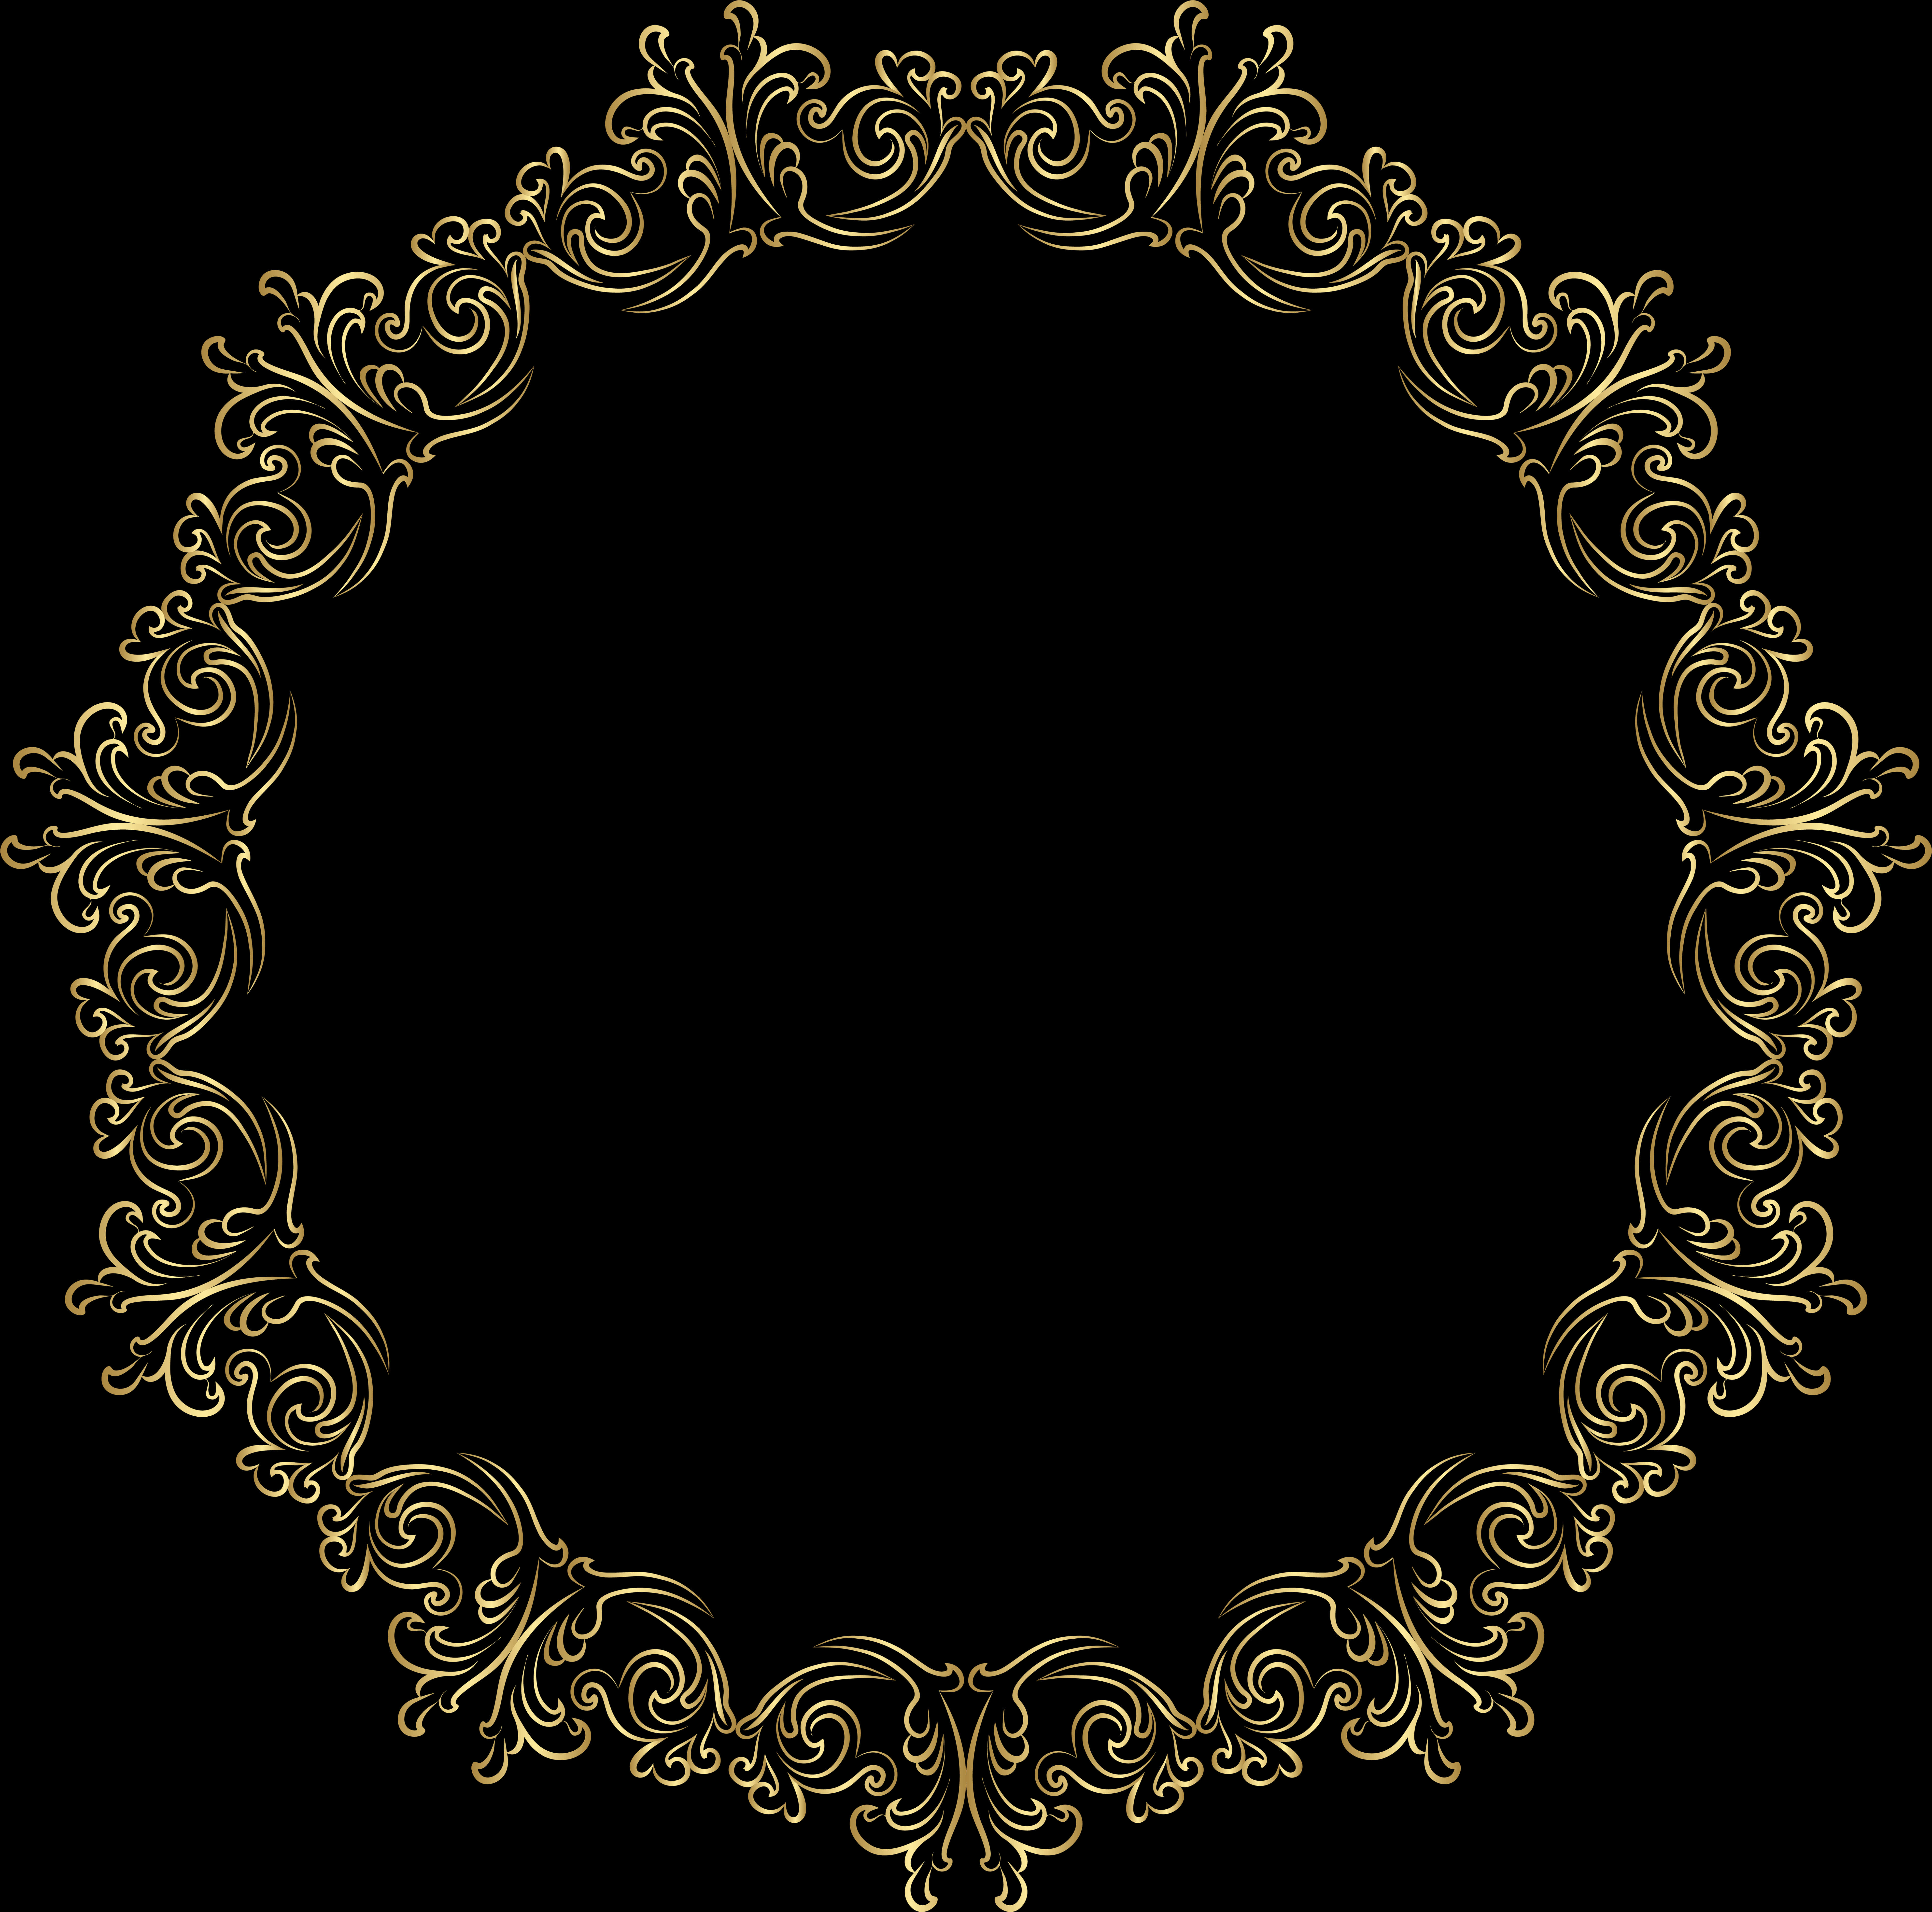 A Circular Gold Frame With Black Background